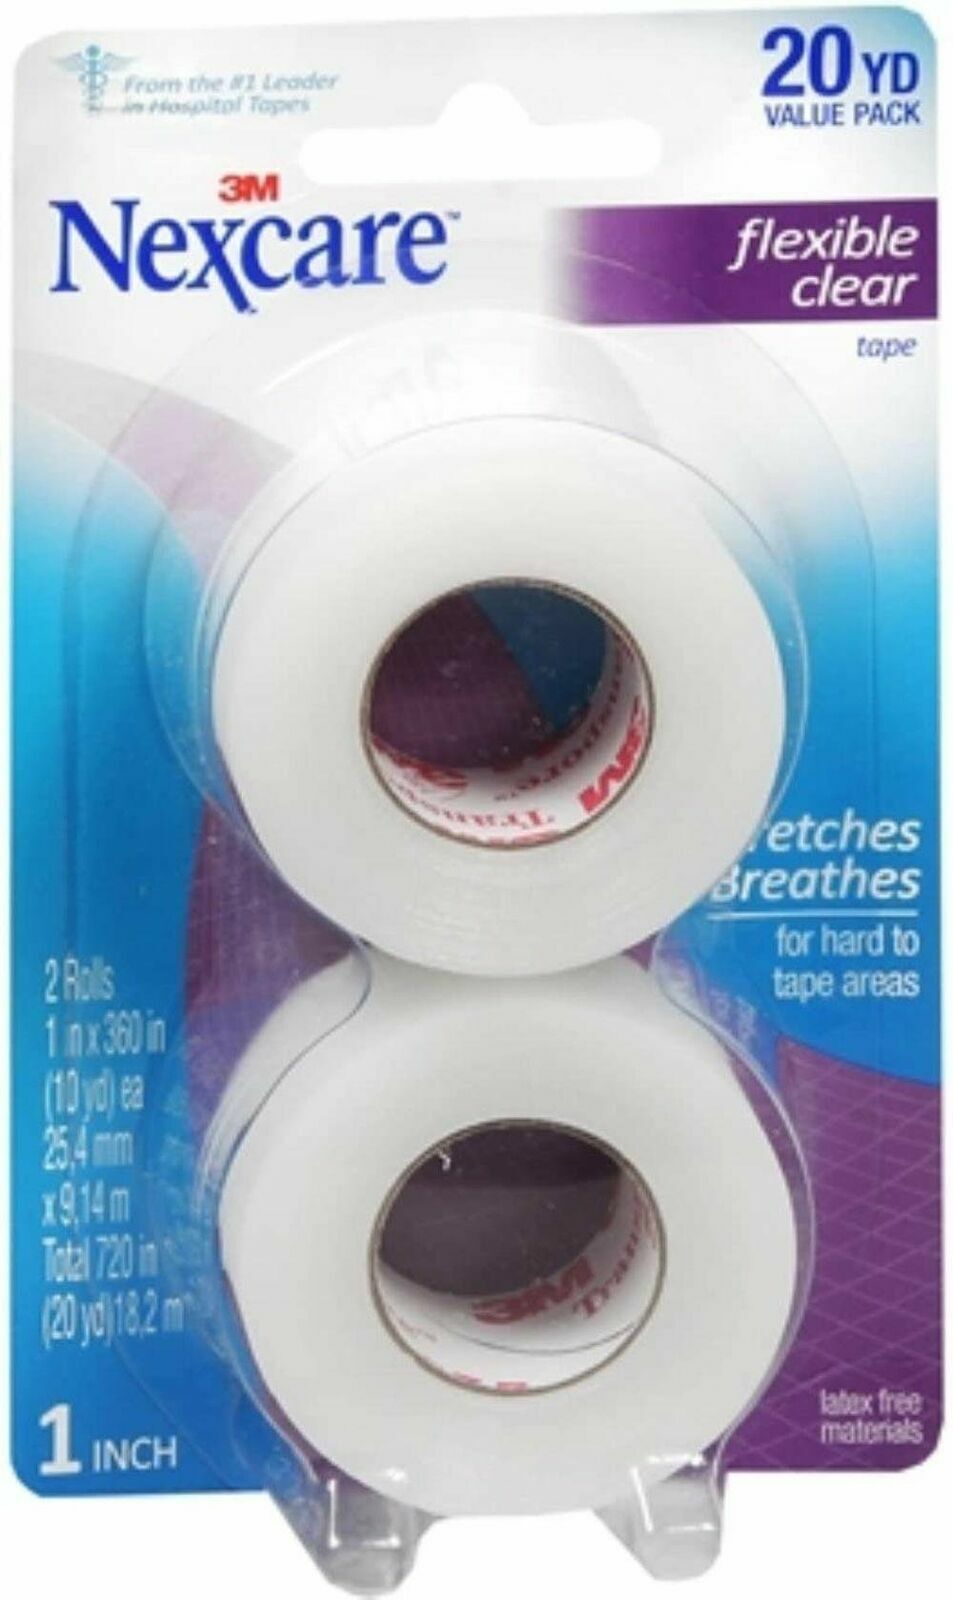 Nexcare Flexible Clear Tape Stretches & Breathes ValuePack  1 Inches x 20 Yard